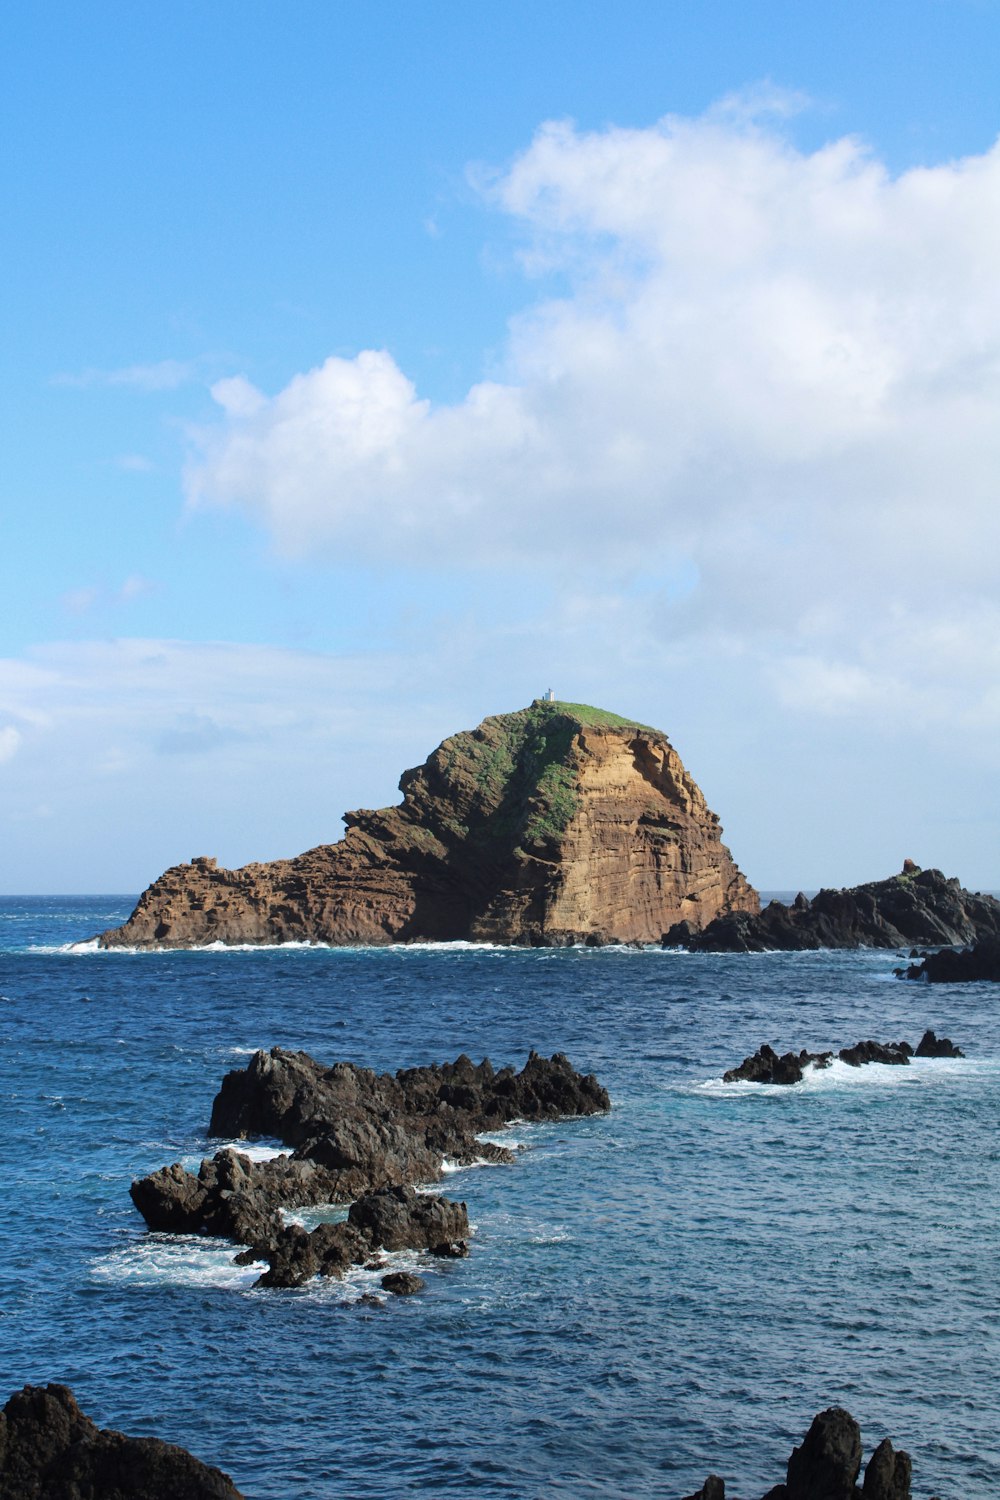 a rocky island in the ocean with Roque de Garachico in the background